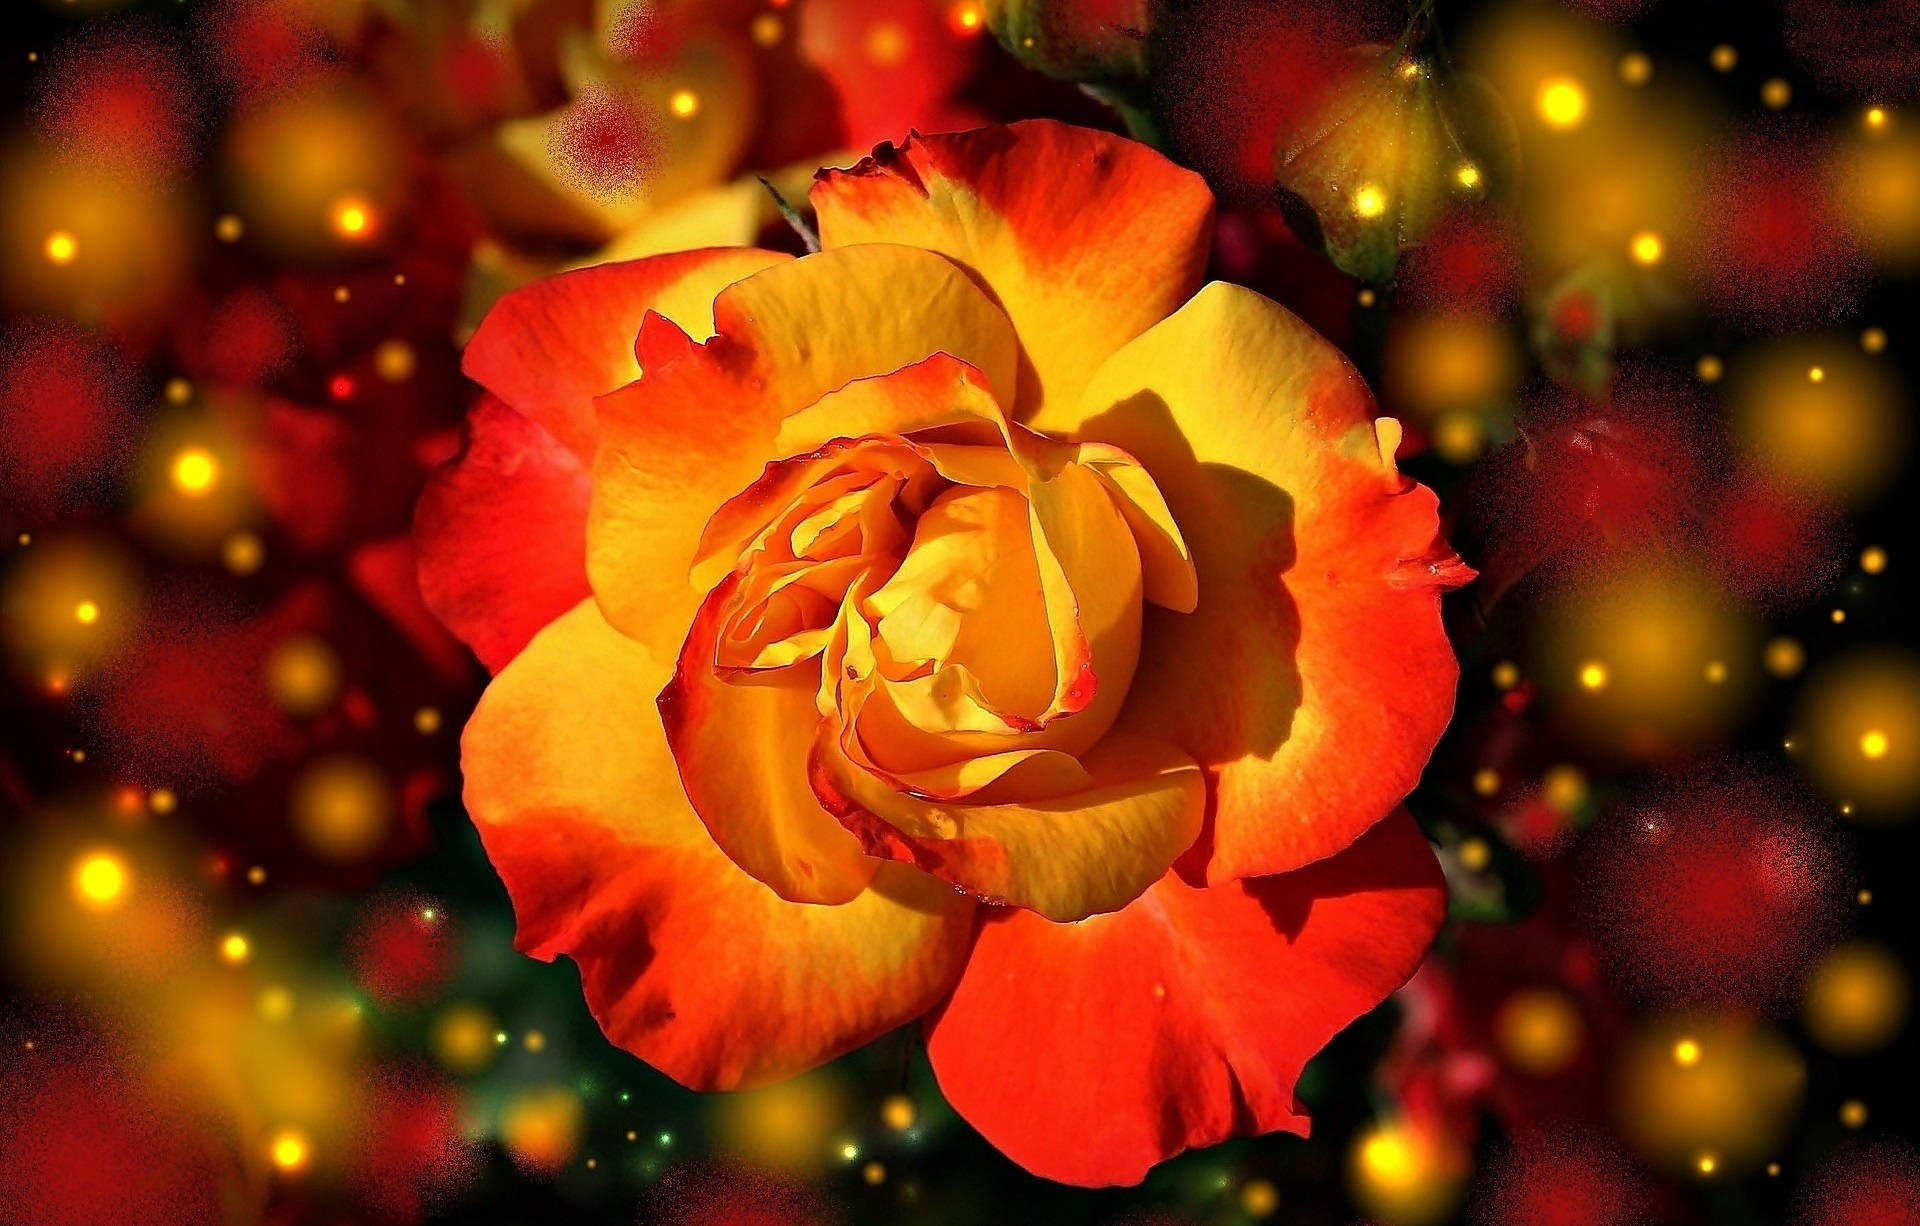 Orange And Yellow Rose With Lights